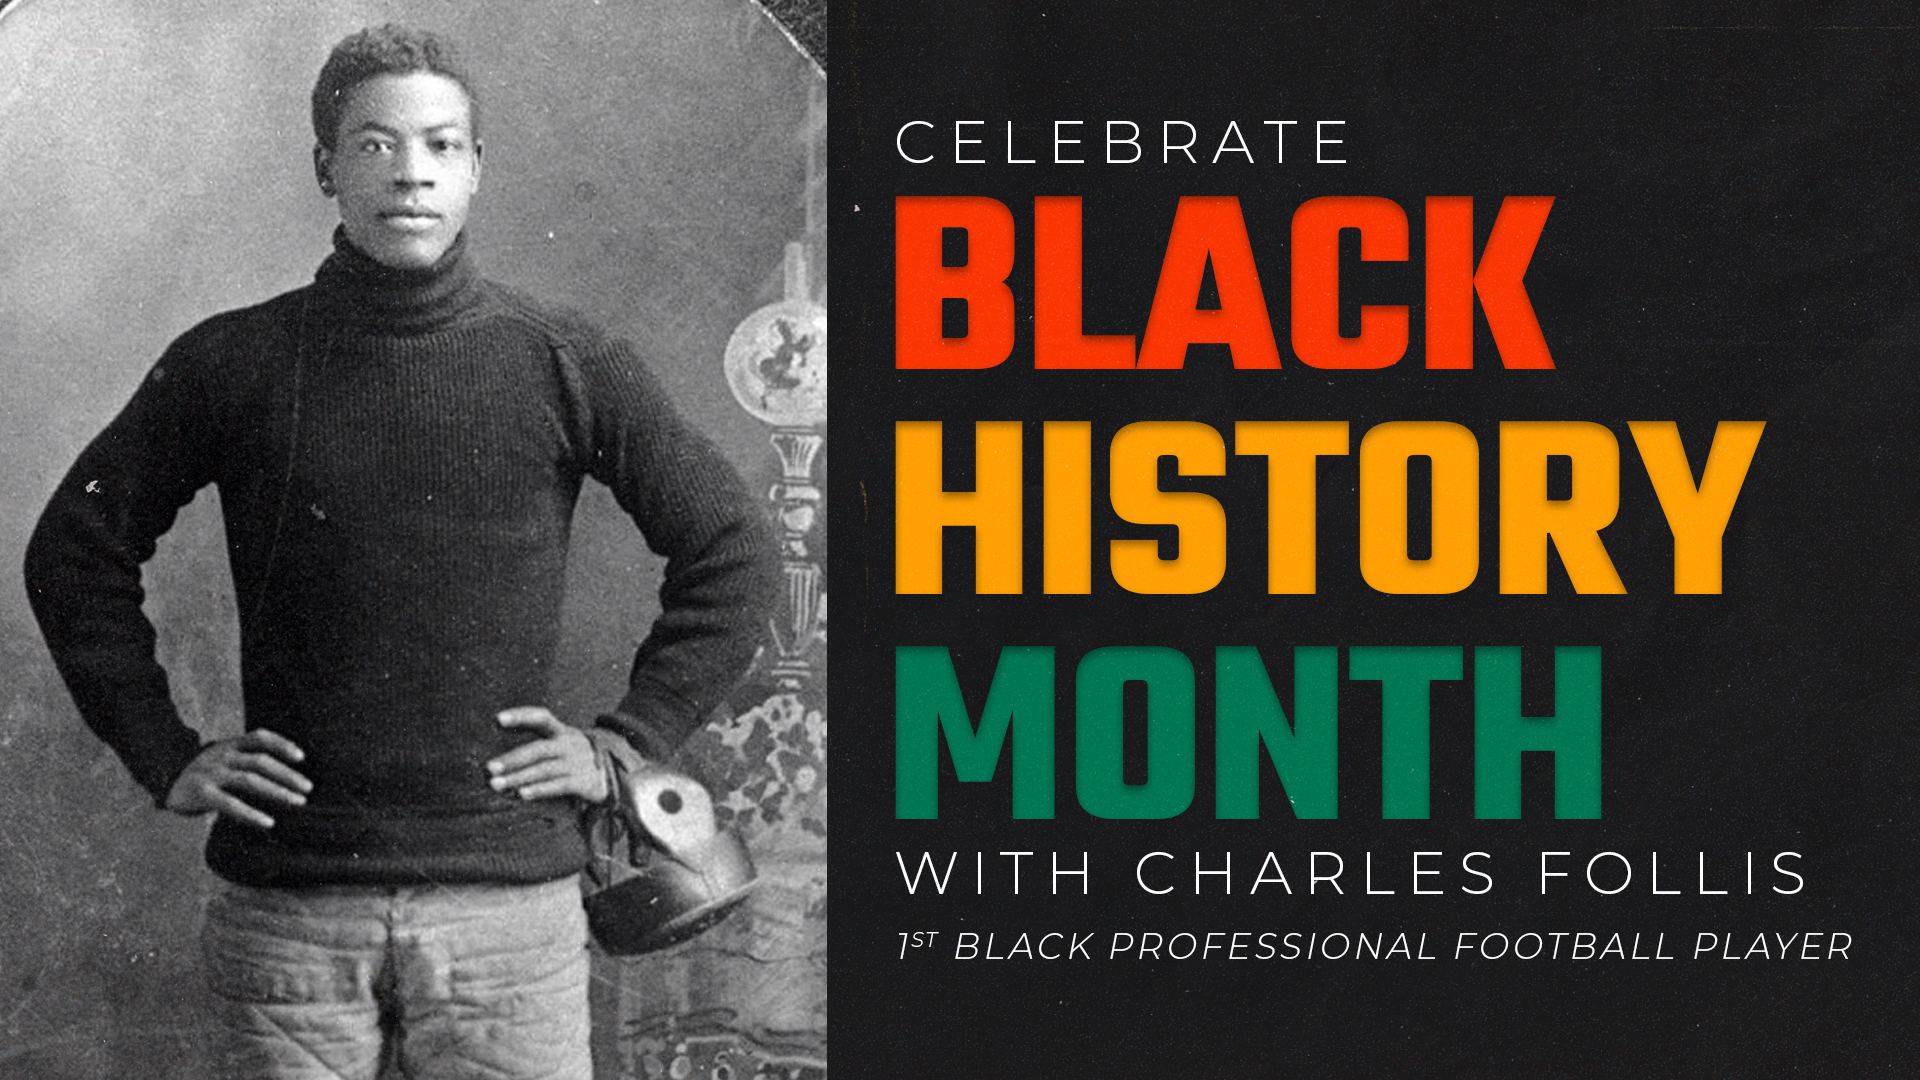 Celebrate Black History Month with Charles Follis, the 1st Black professional football player